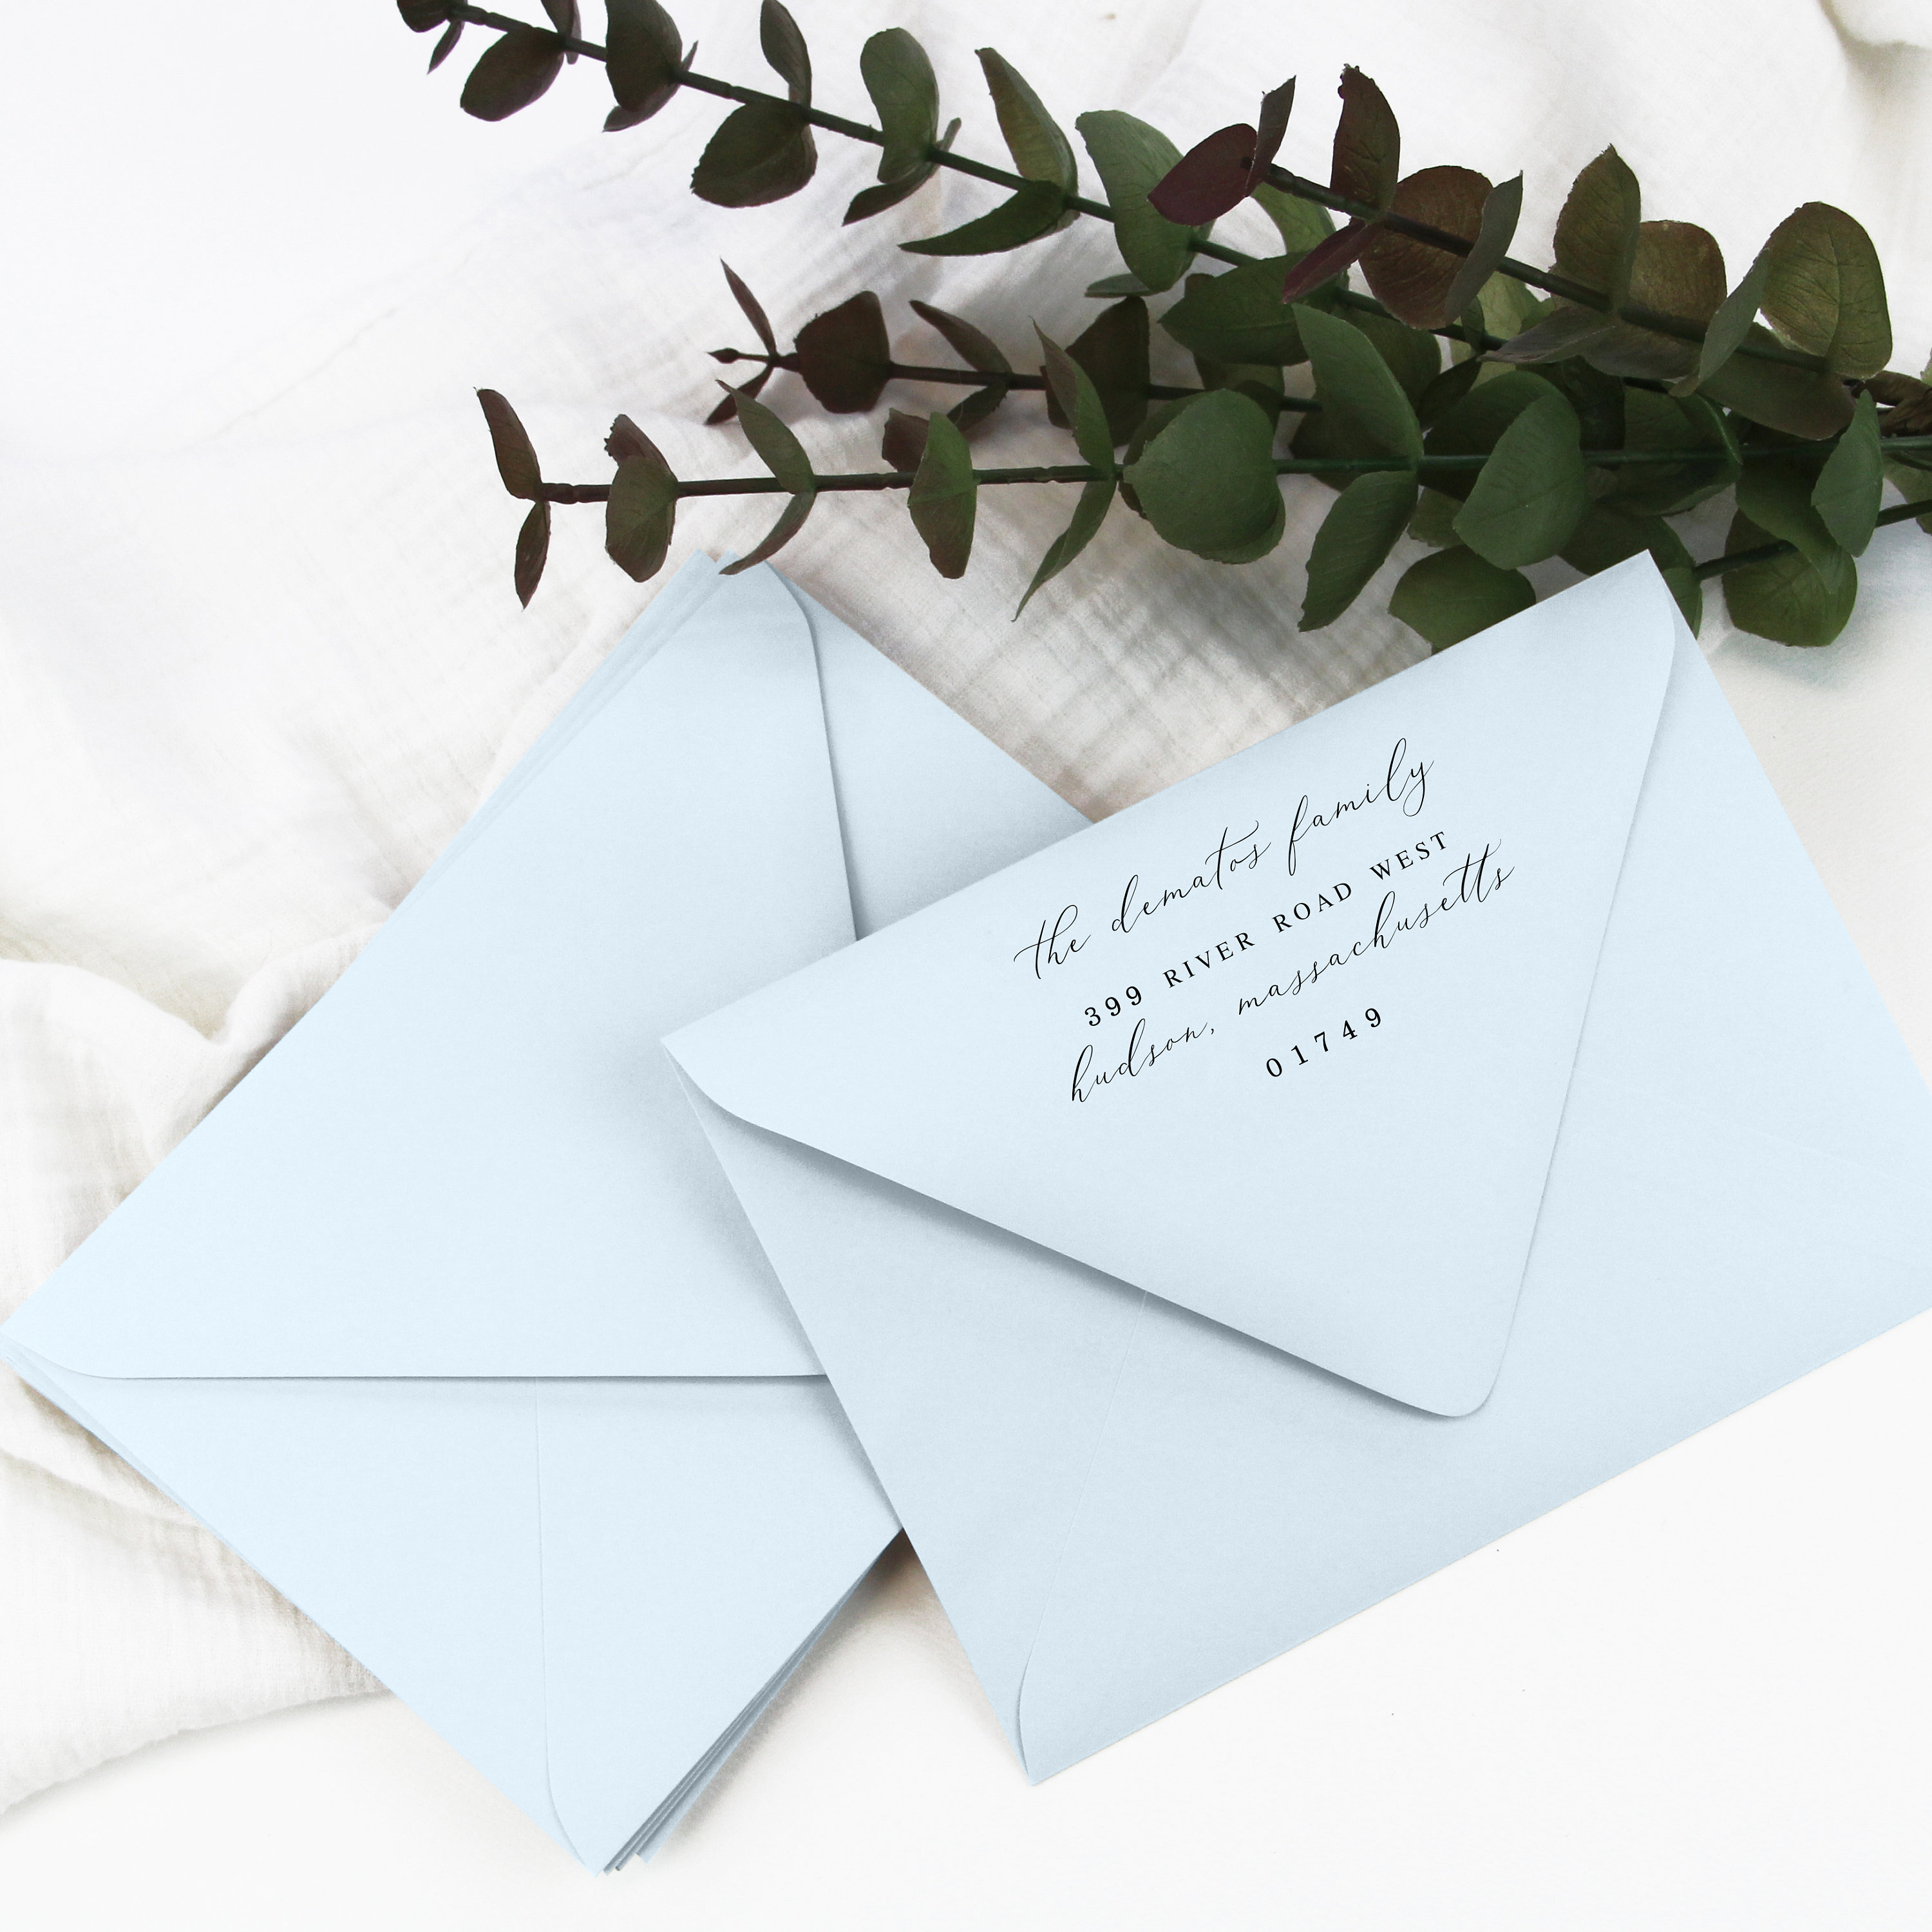 Dusty Green Wedding Envelopes 5x7 A7, A2, A6, A9 More Standard Sizes 25  Blank Envelopes Printing Available 